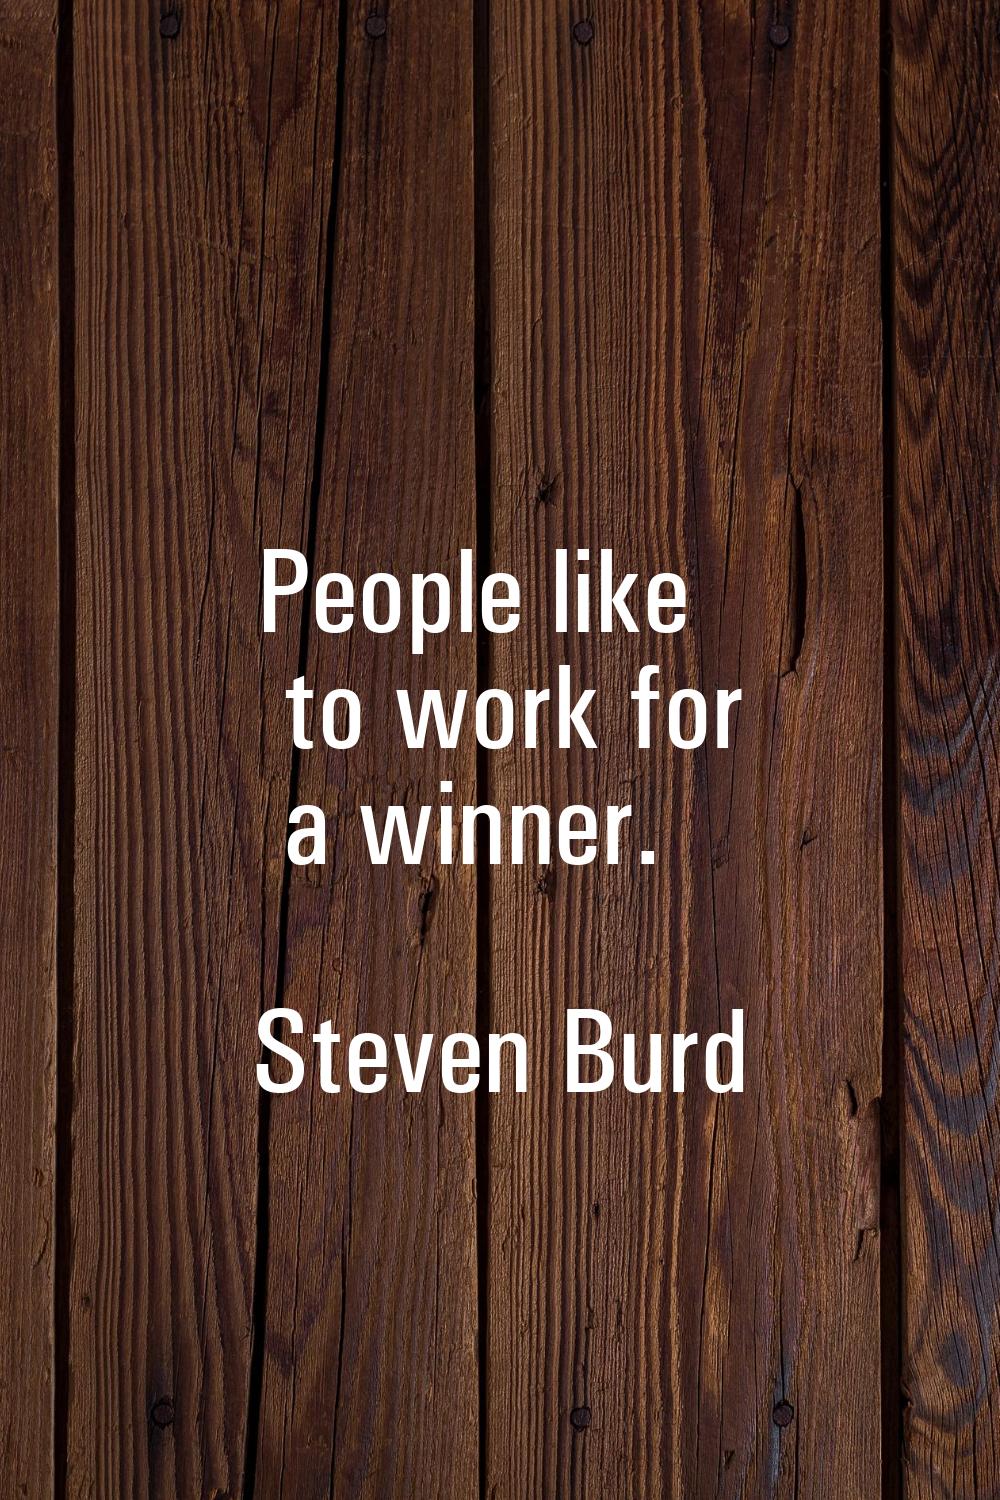 People like to work for a winner.